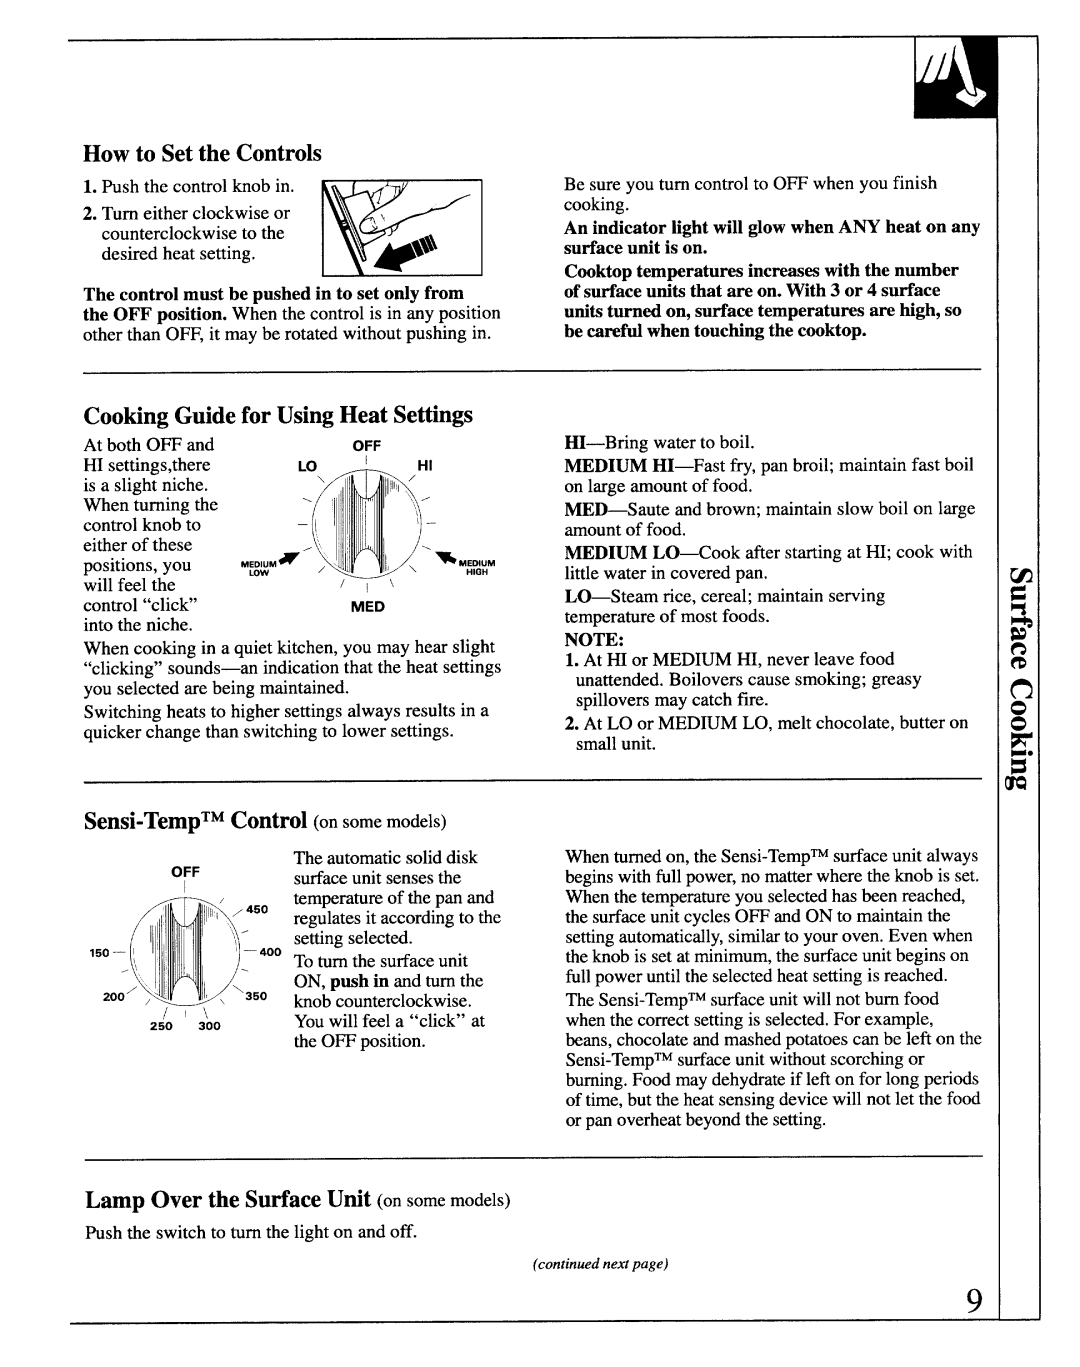 GE JB571GM, JB570GM How to Set the Controls, Cooting Guide for Using Heat Settings, Sensi-Temp‘MControl on some models 